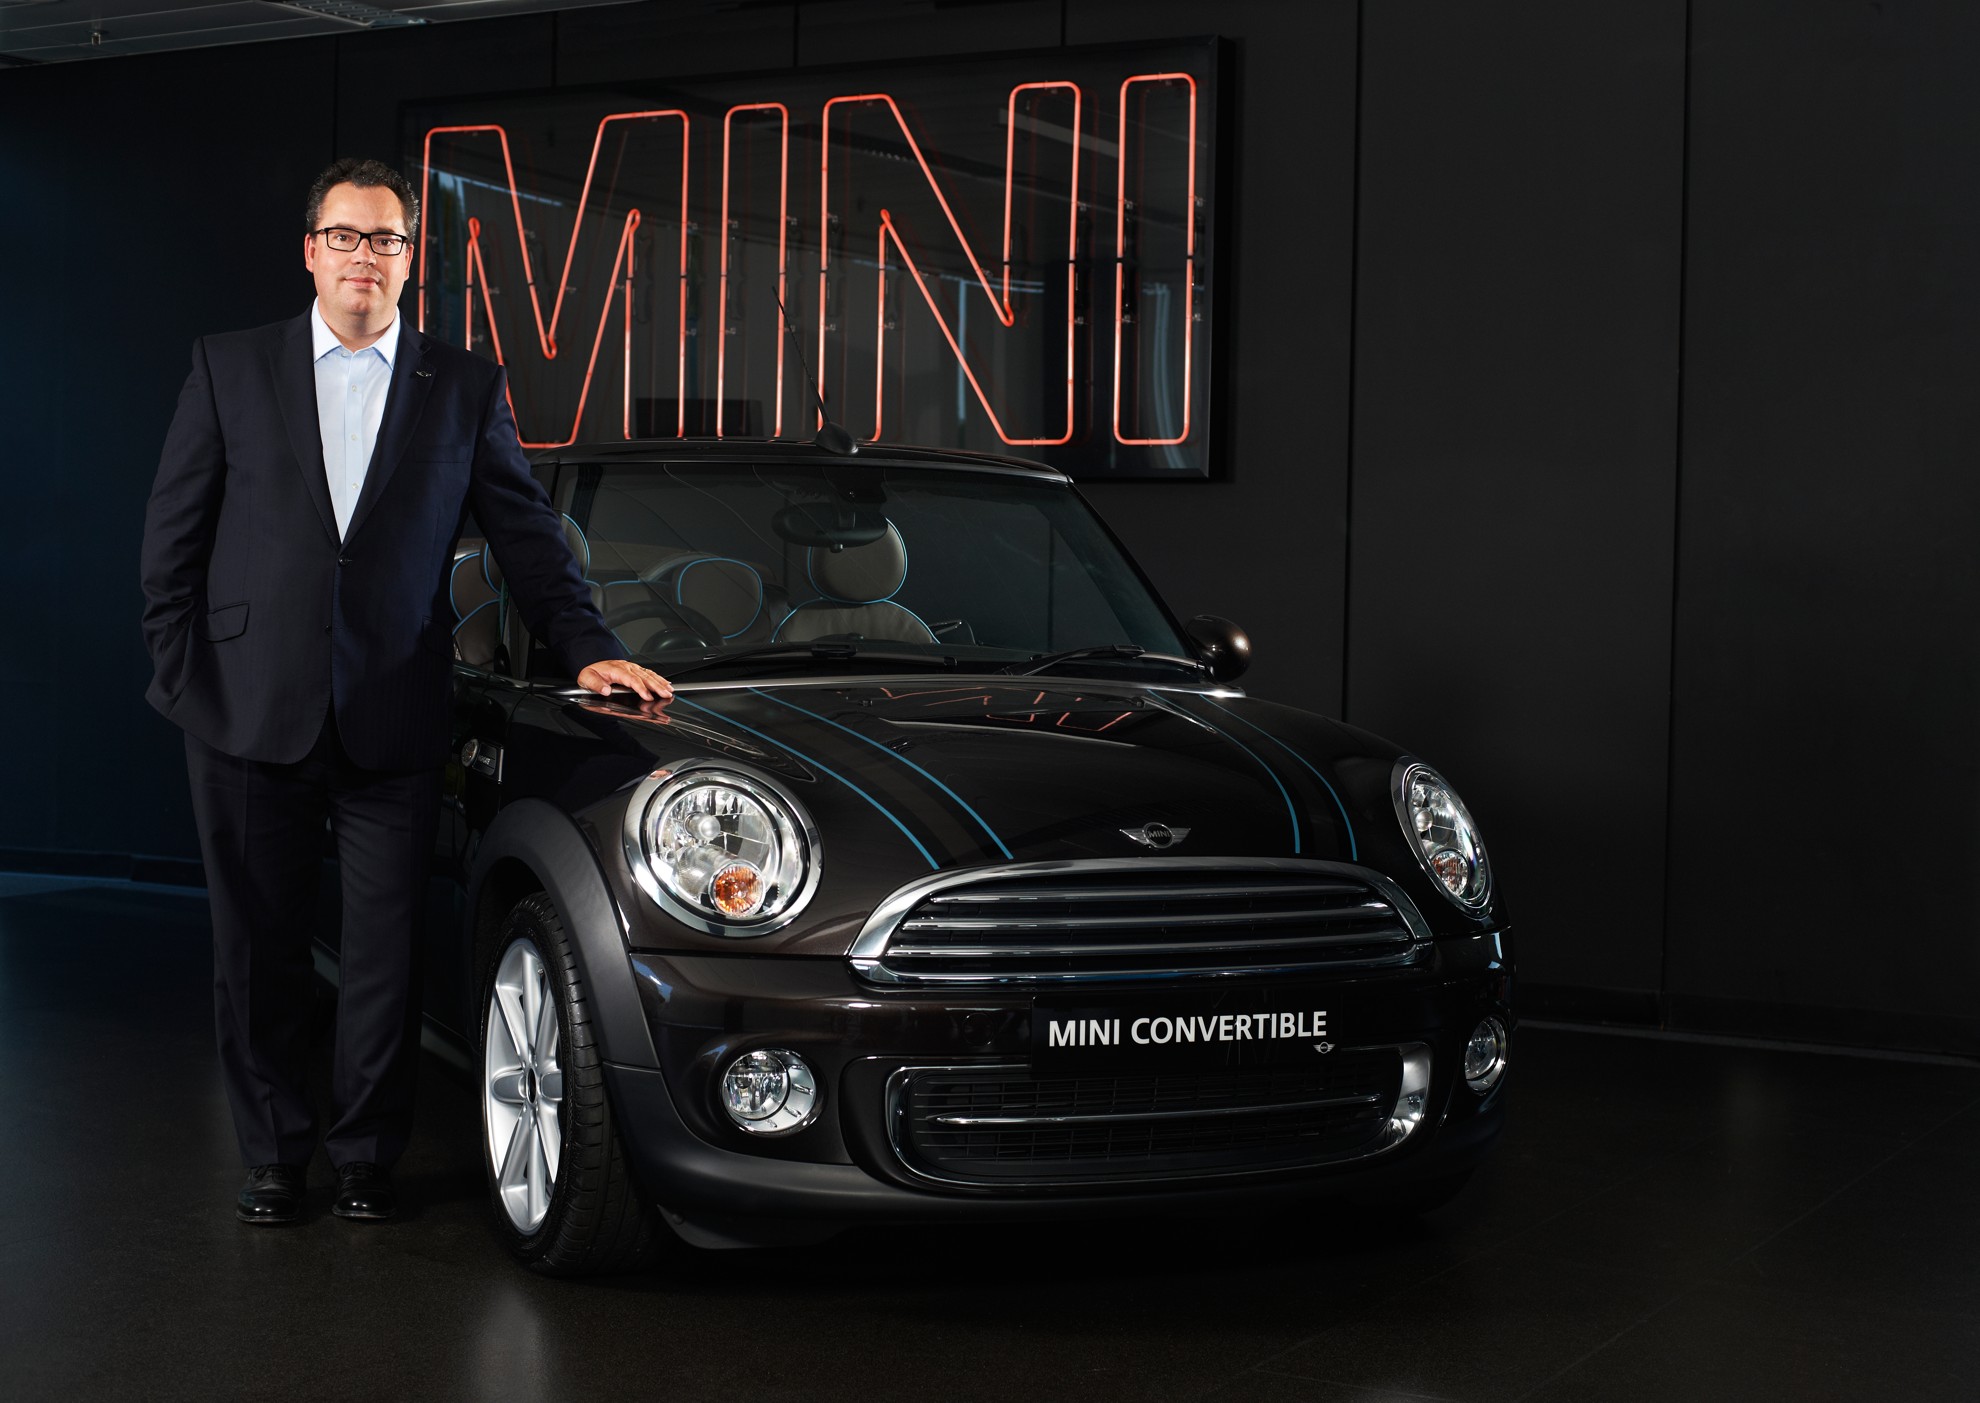 CHRIS BROWNRIDGE APPOINTED AS NEW DIRECTOR FOR MINI UK